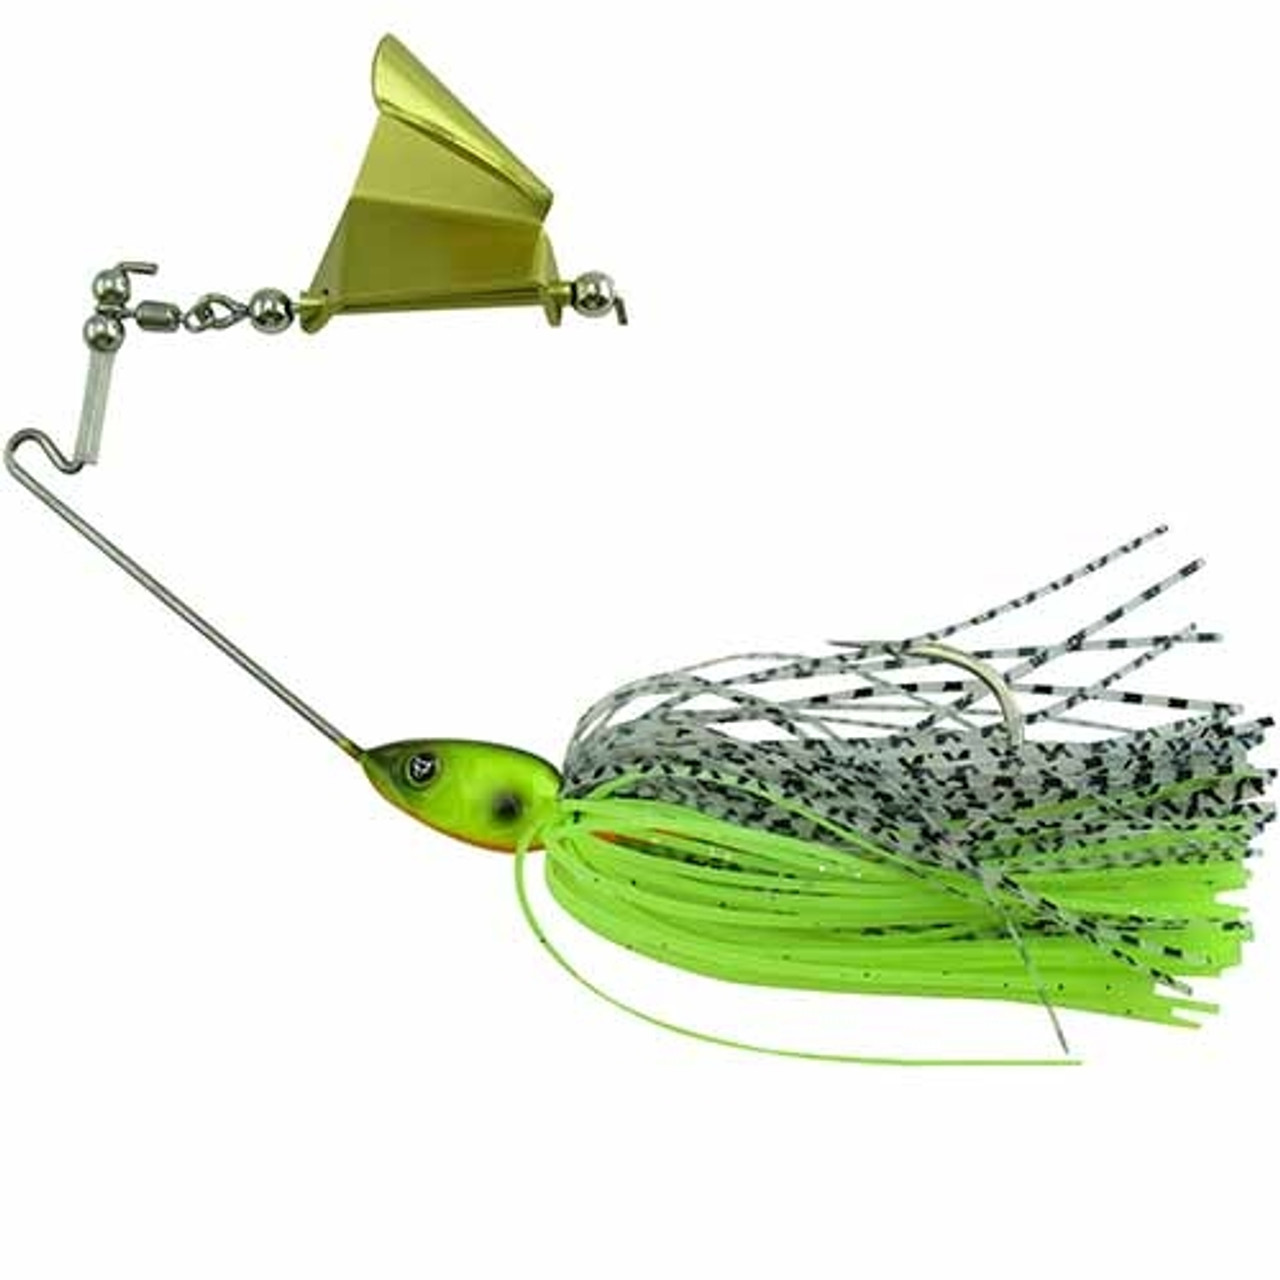 All Saltwater Fishing Baits, Lures LIVETARGET for sale